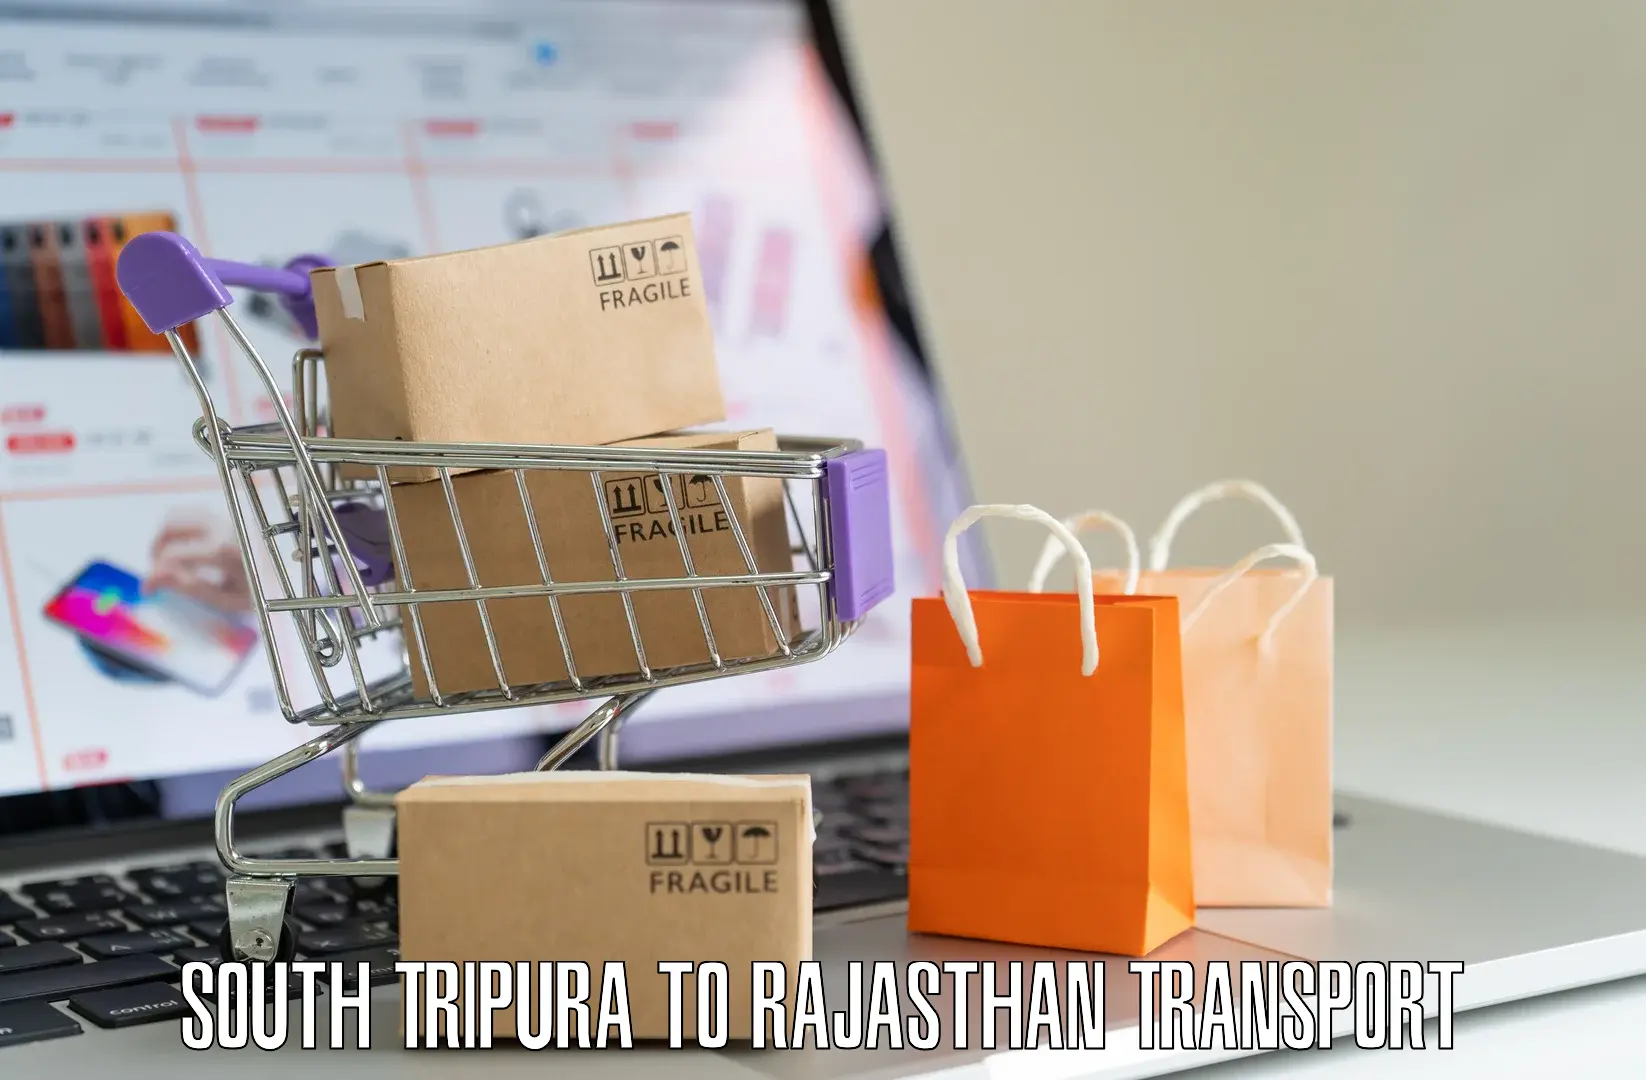 Online transport in South Tripura to Lalsot